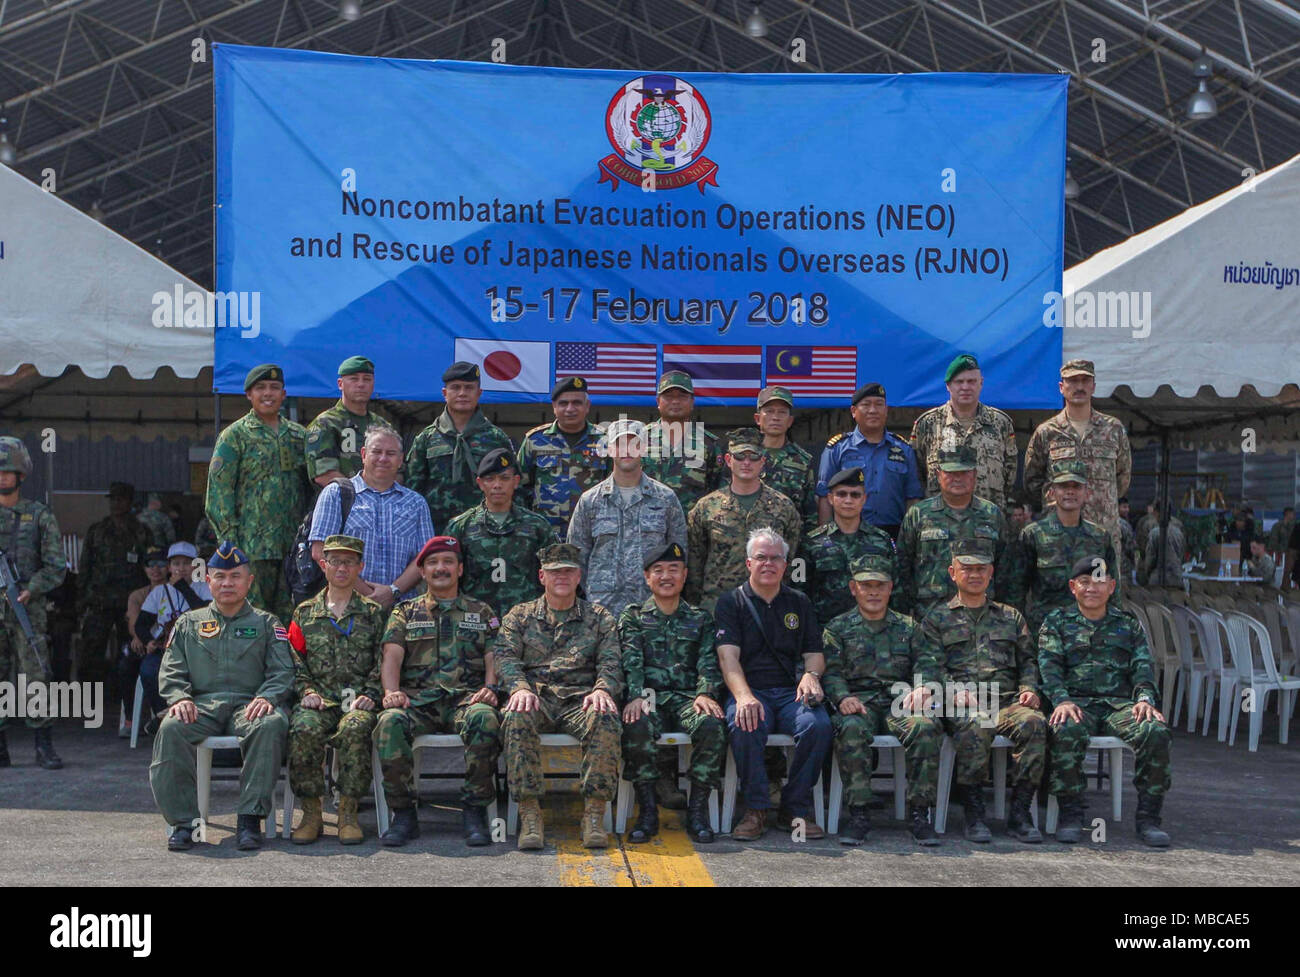 Commandant of the Marine Corps Gen. Robert B. Neller and other distinguished visitors pose for a photo during a Noncombatant Evacuation Operation (NEO) and Rescue of Japanese Nationals Overseas (RJNO) exercise, U-Tapao, Thailand, Feb. 17, 2018. NEO and RJNO exercises were held to ensure personnel readiness of multiple nations in the event of evacuation. (U.S. Marine Corps Stock Photo